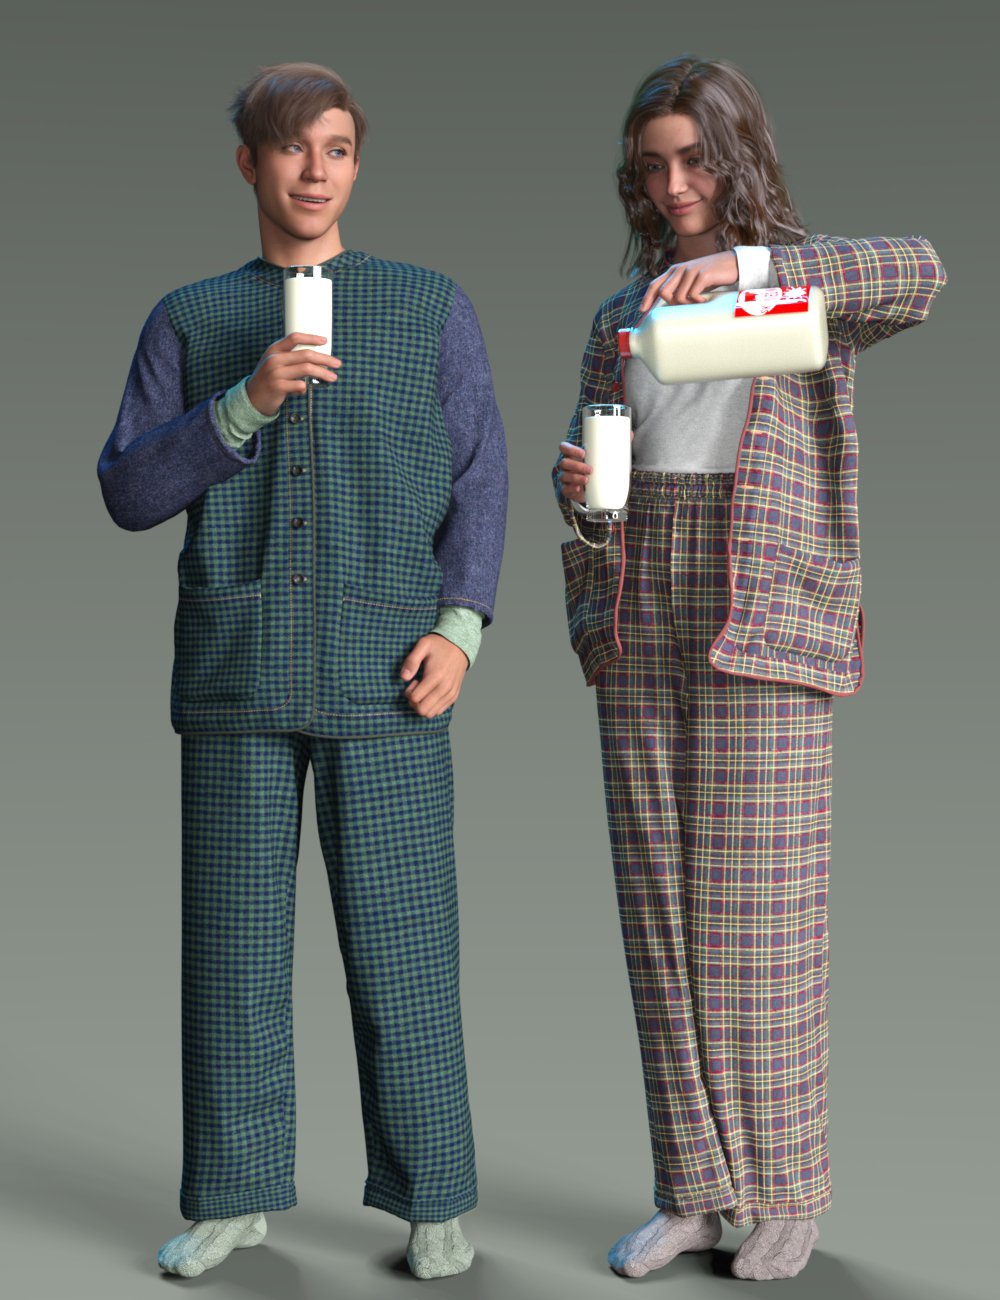 dForce Comfy Pajama Set for Genesis 9, 8, and 8.1 by: Dimidrol, 3D Models by Daz 3D